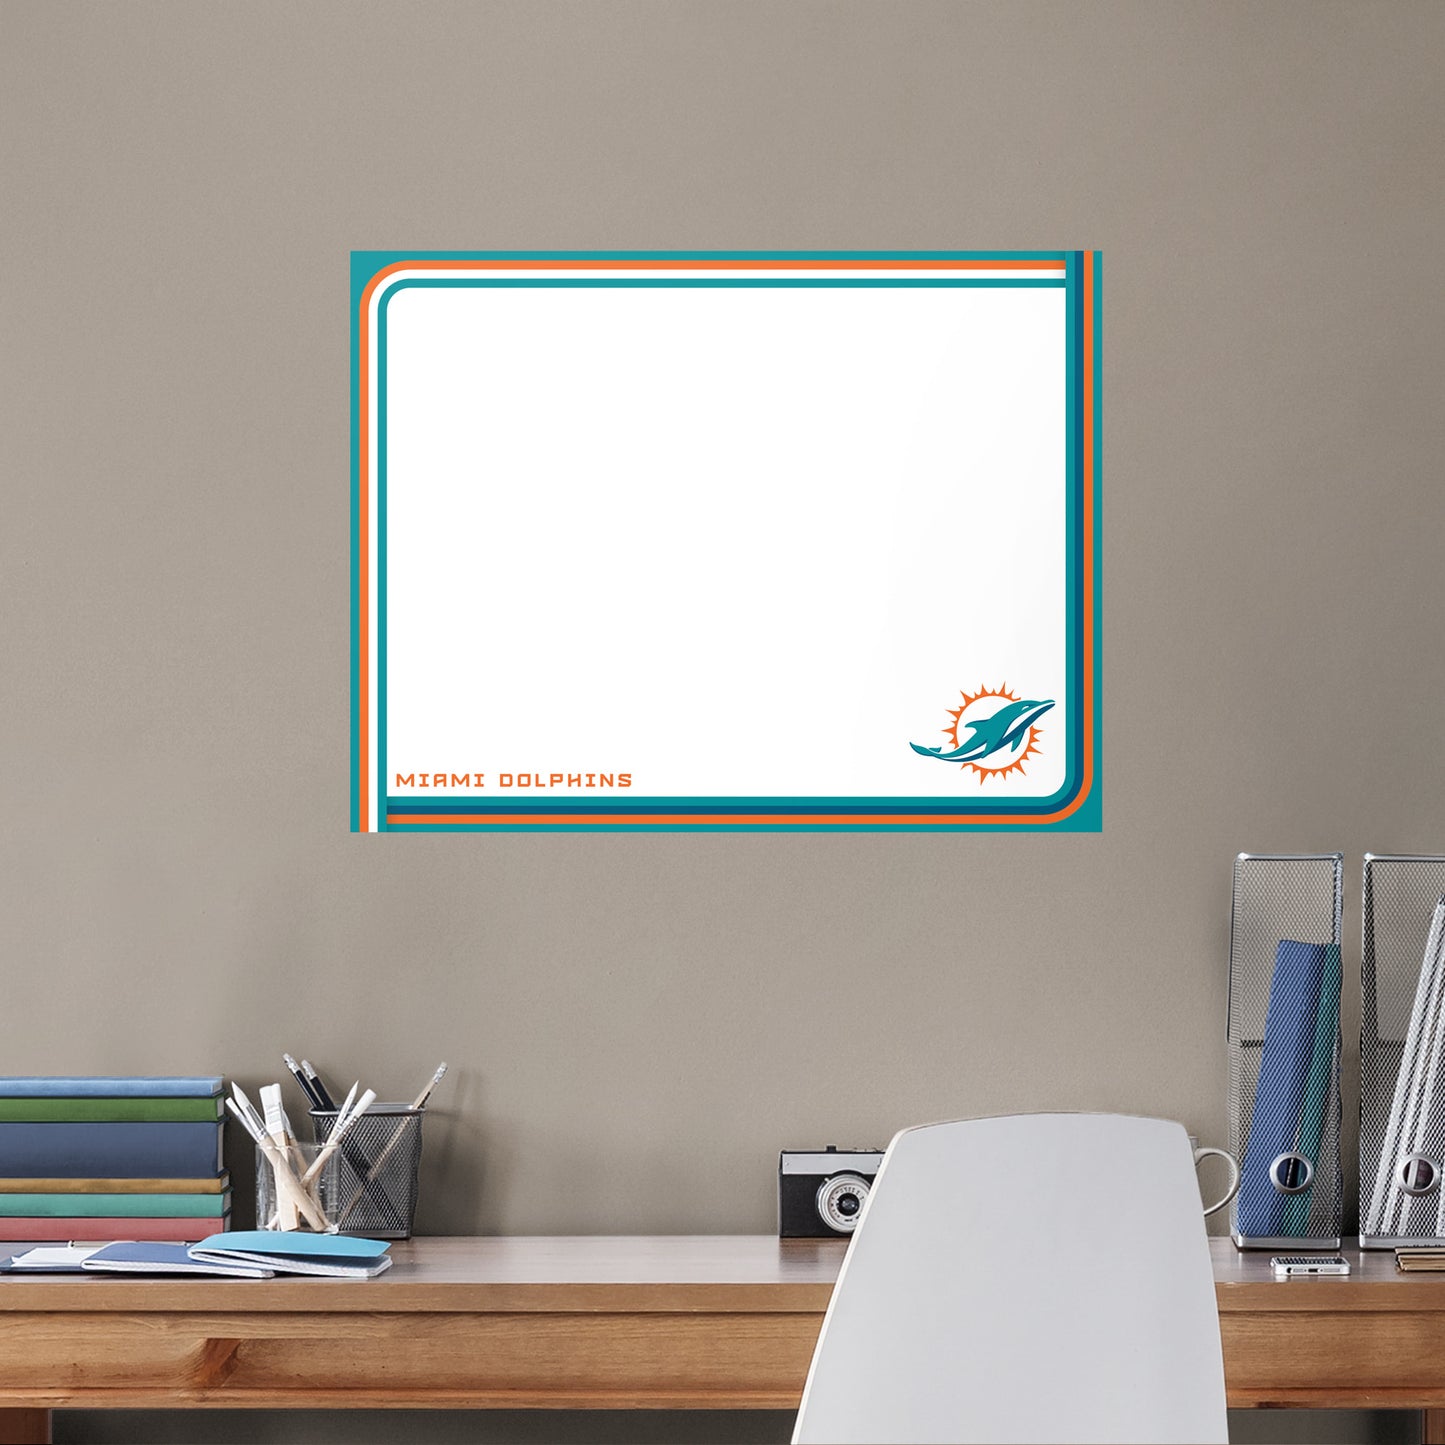 Miami Dolphins:  Dry Erase Whiteboard        - Officially Licensed NFL Removable Wall   Adhesive Decal